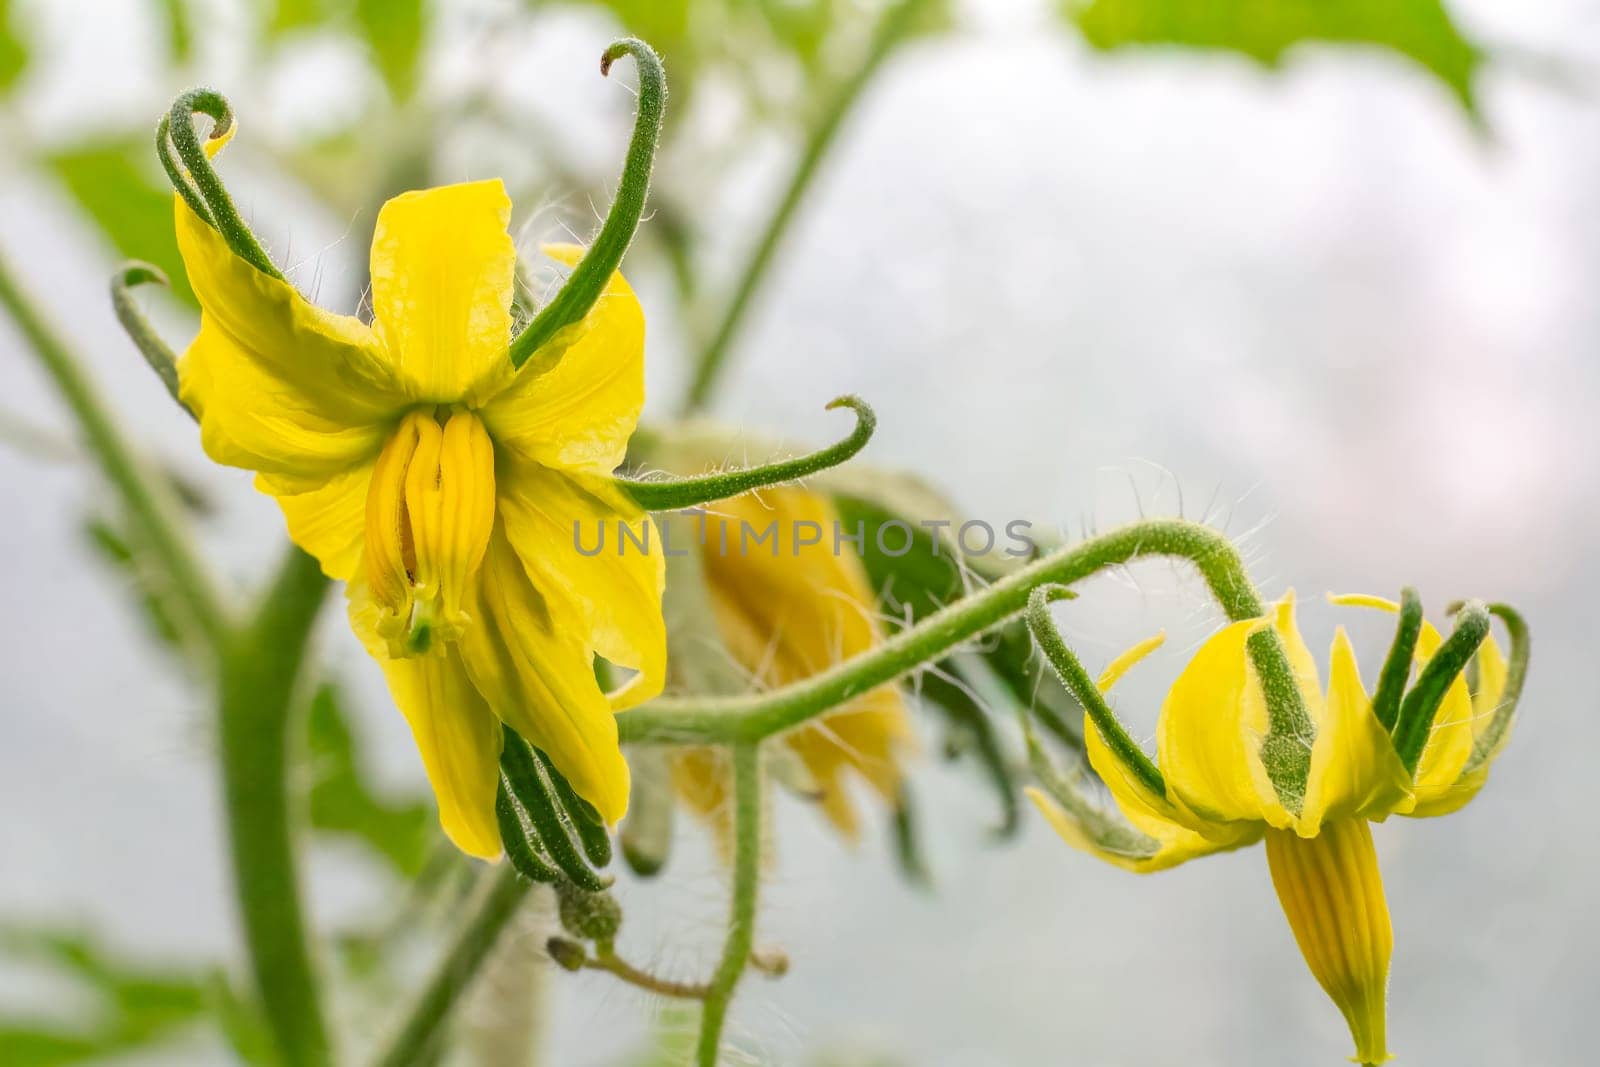 Close-up a tomato bush with flowers on a branch growing in the greenhouse. Shallow depth of field. Focus on flowers.